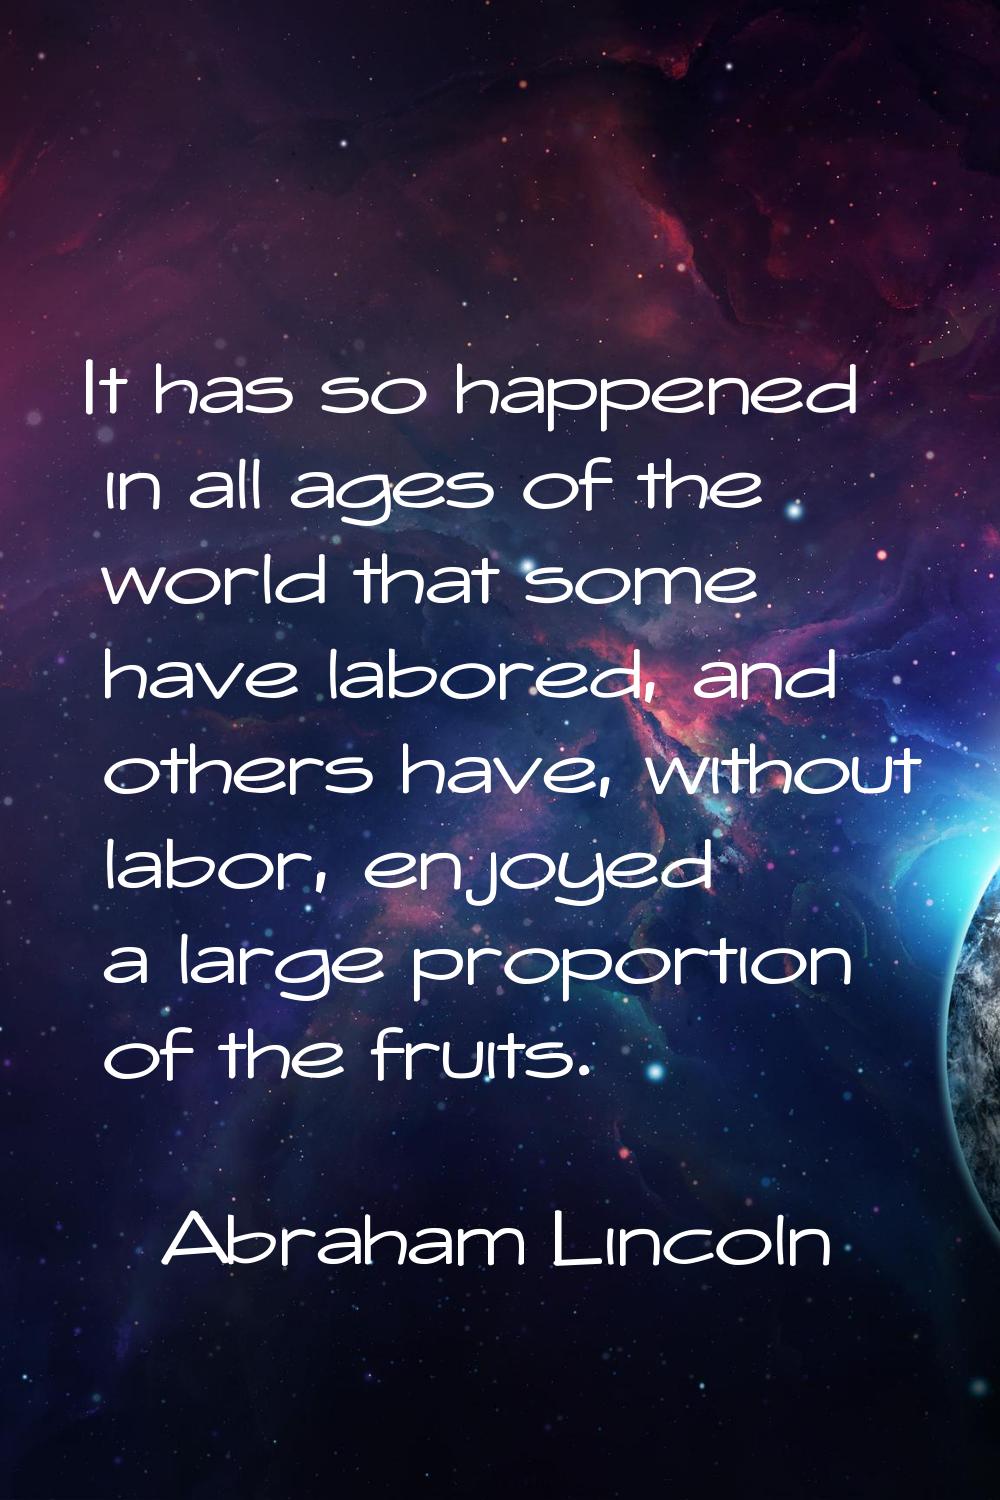 It has so happened in all ages of the world that some have labored, and others have, without labor,